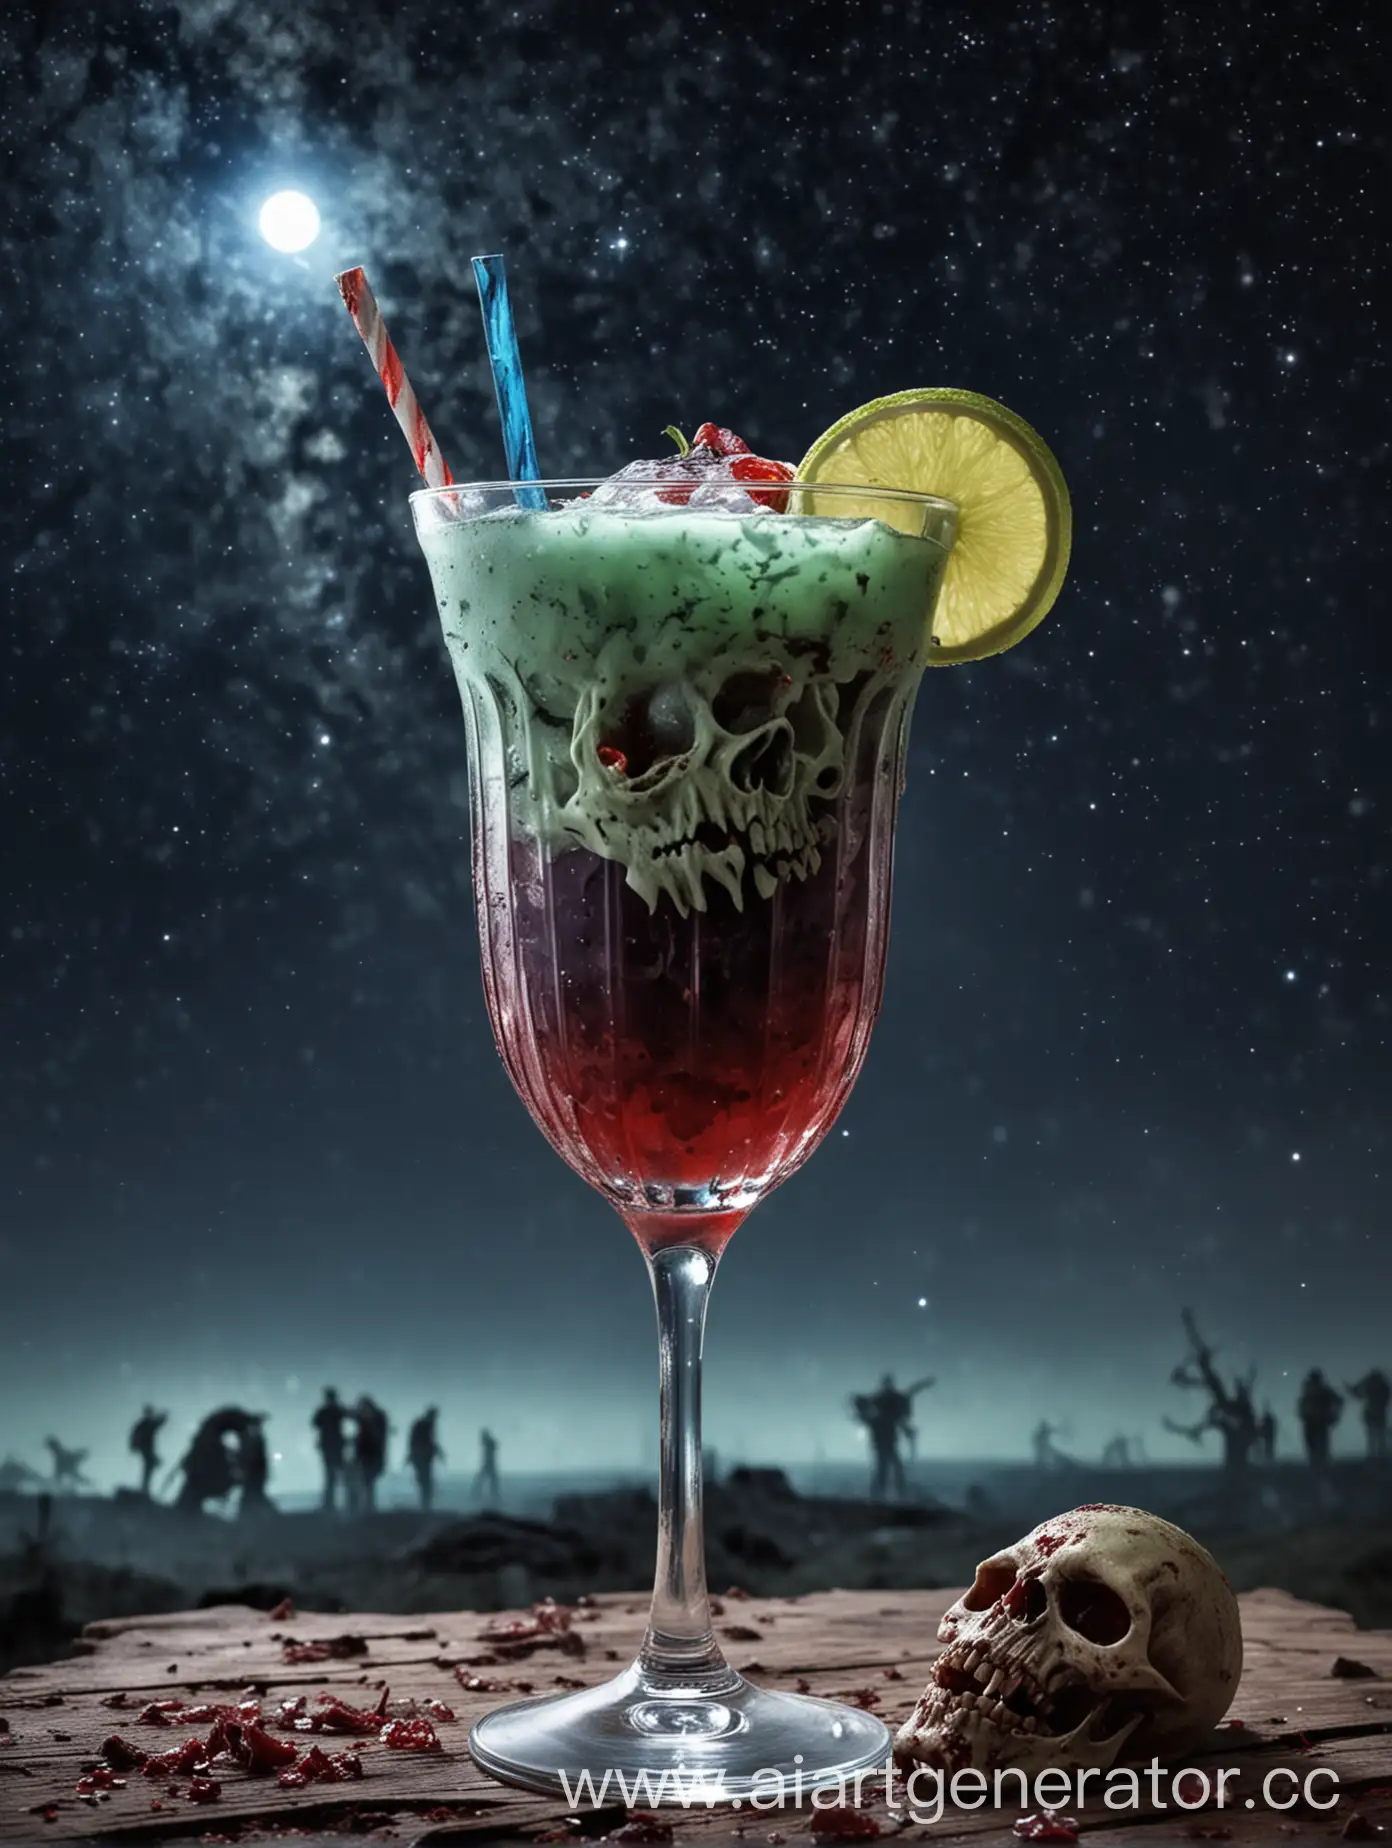 Cocktail-Party-Under-a-Starry-Sky-Amid-Zombie-Attack